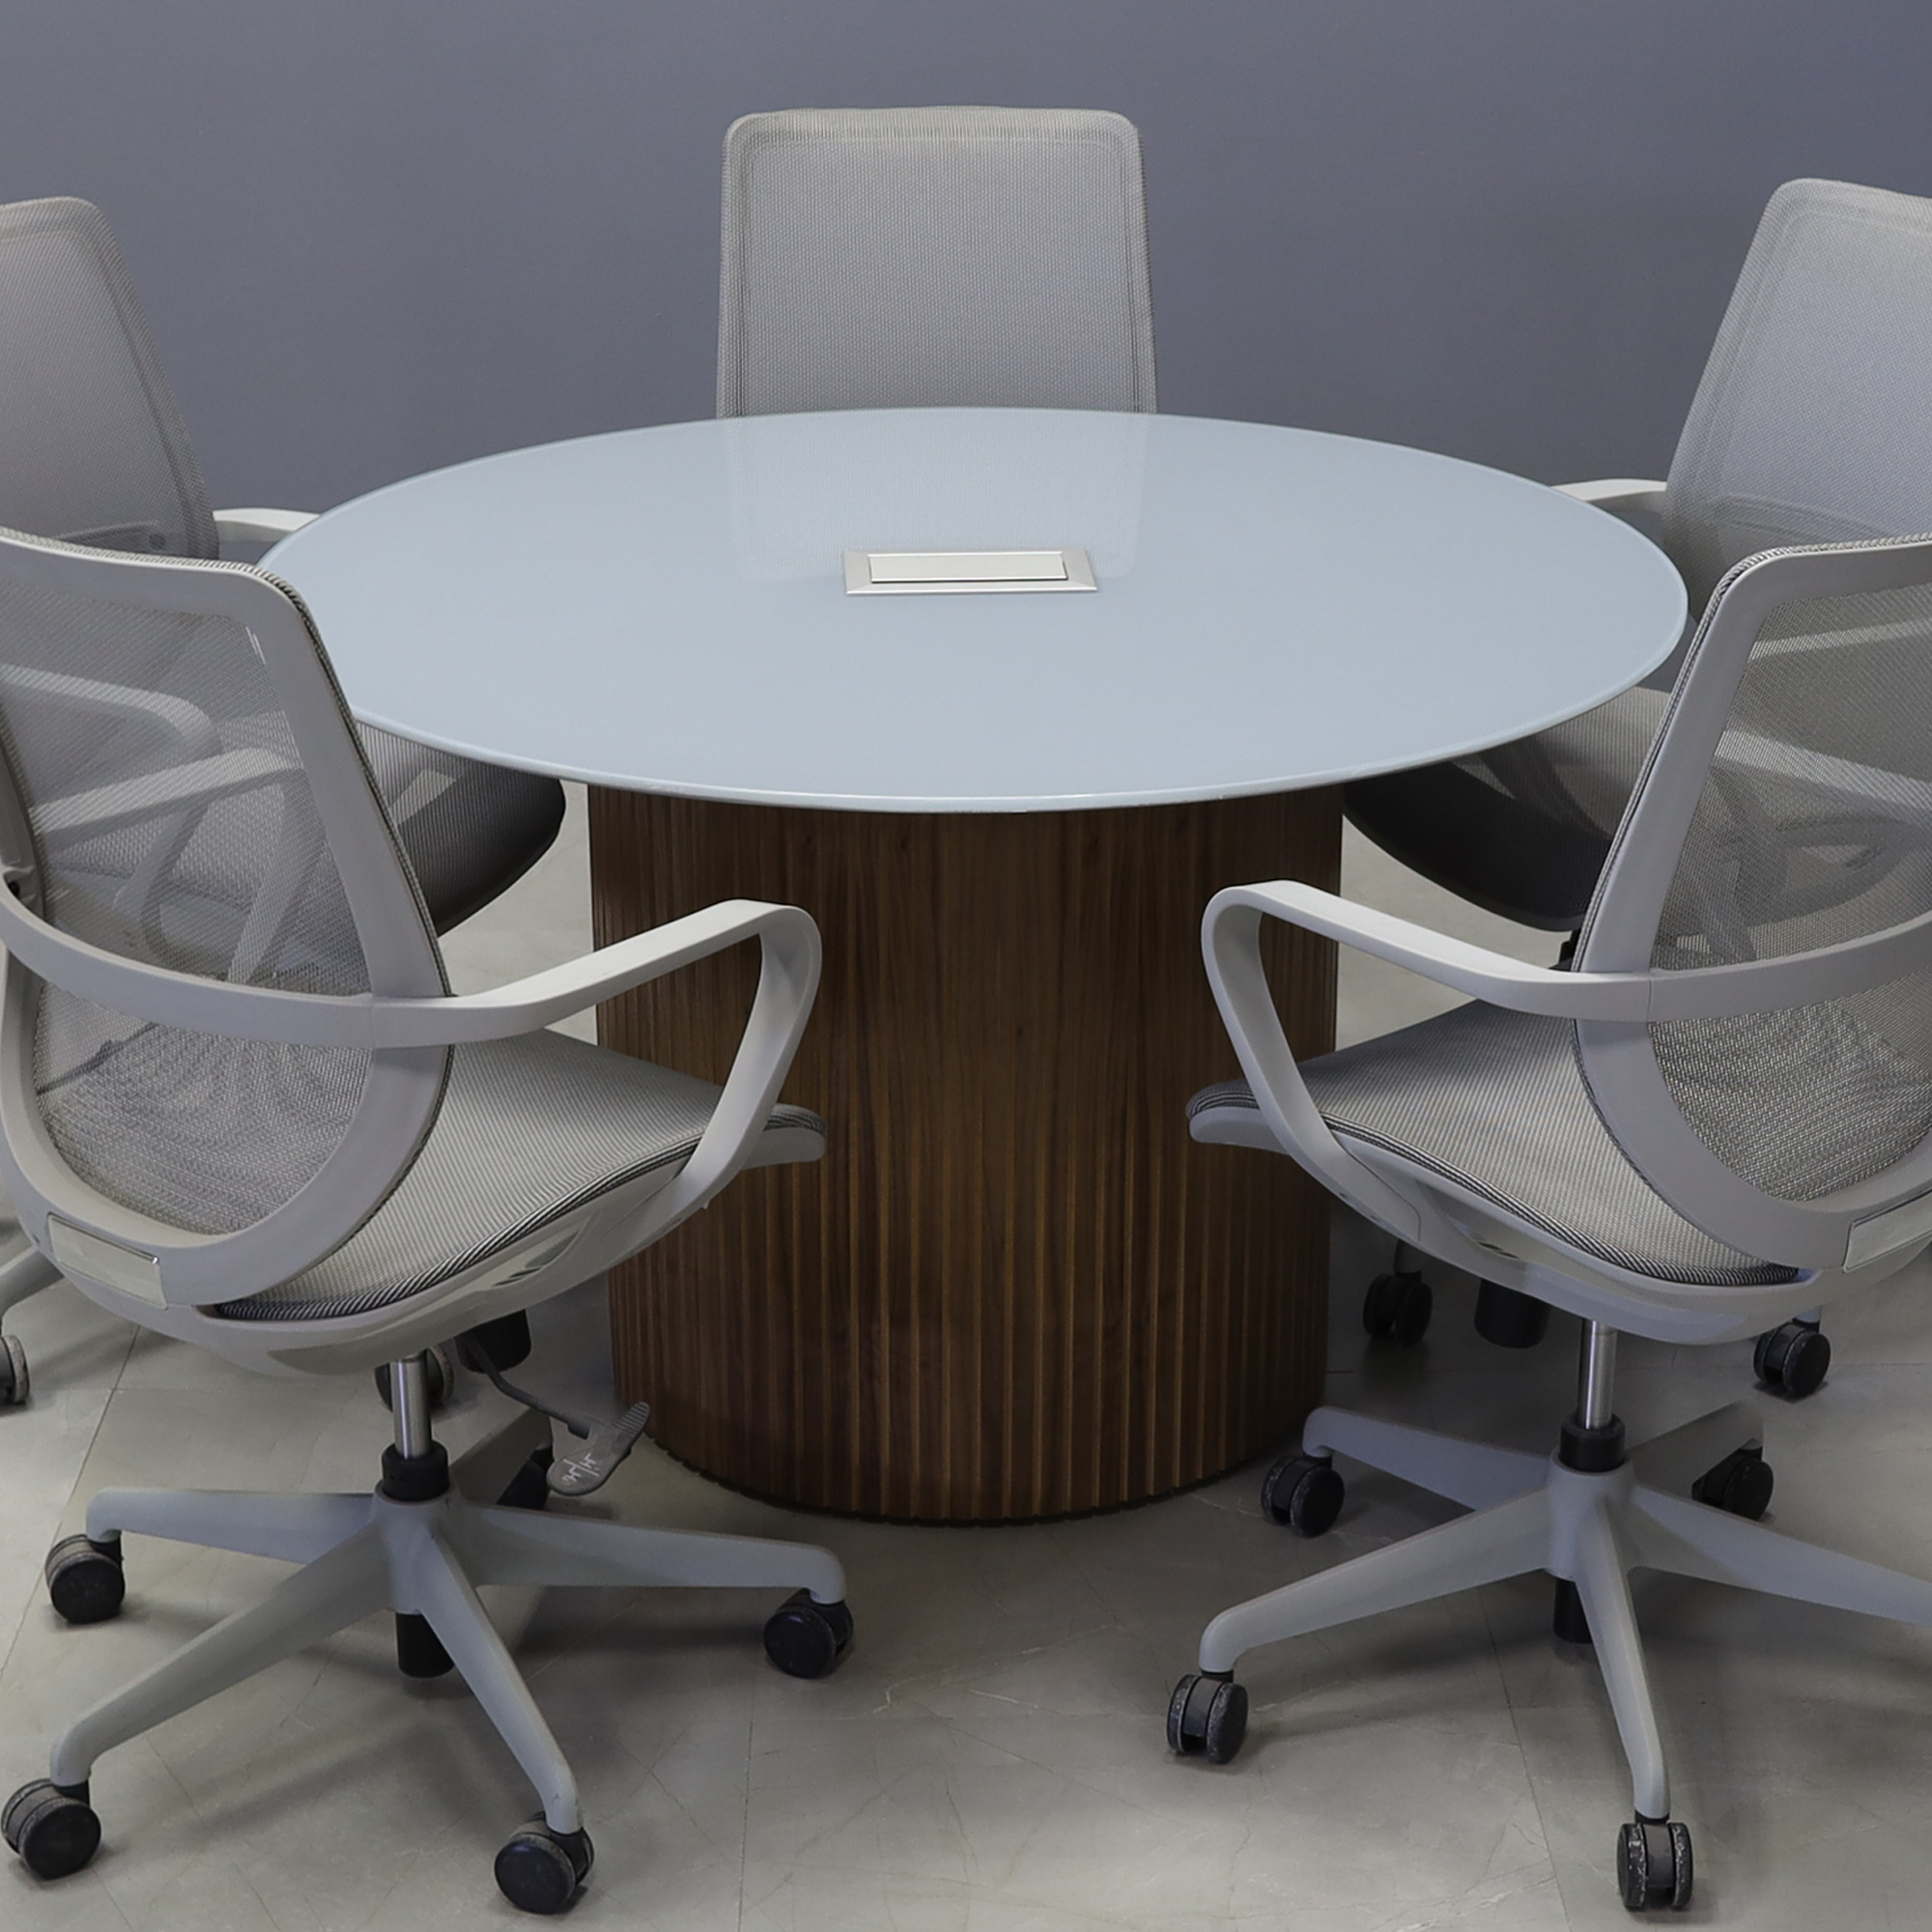 48 inches Omaha Round Conference Table, with 1/2